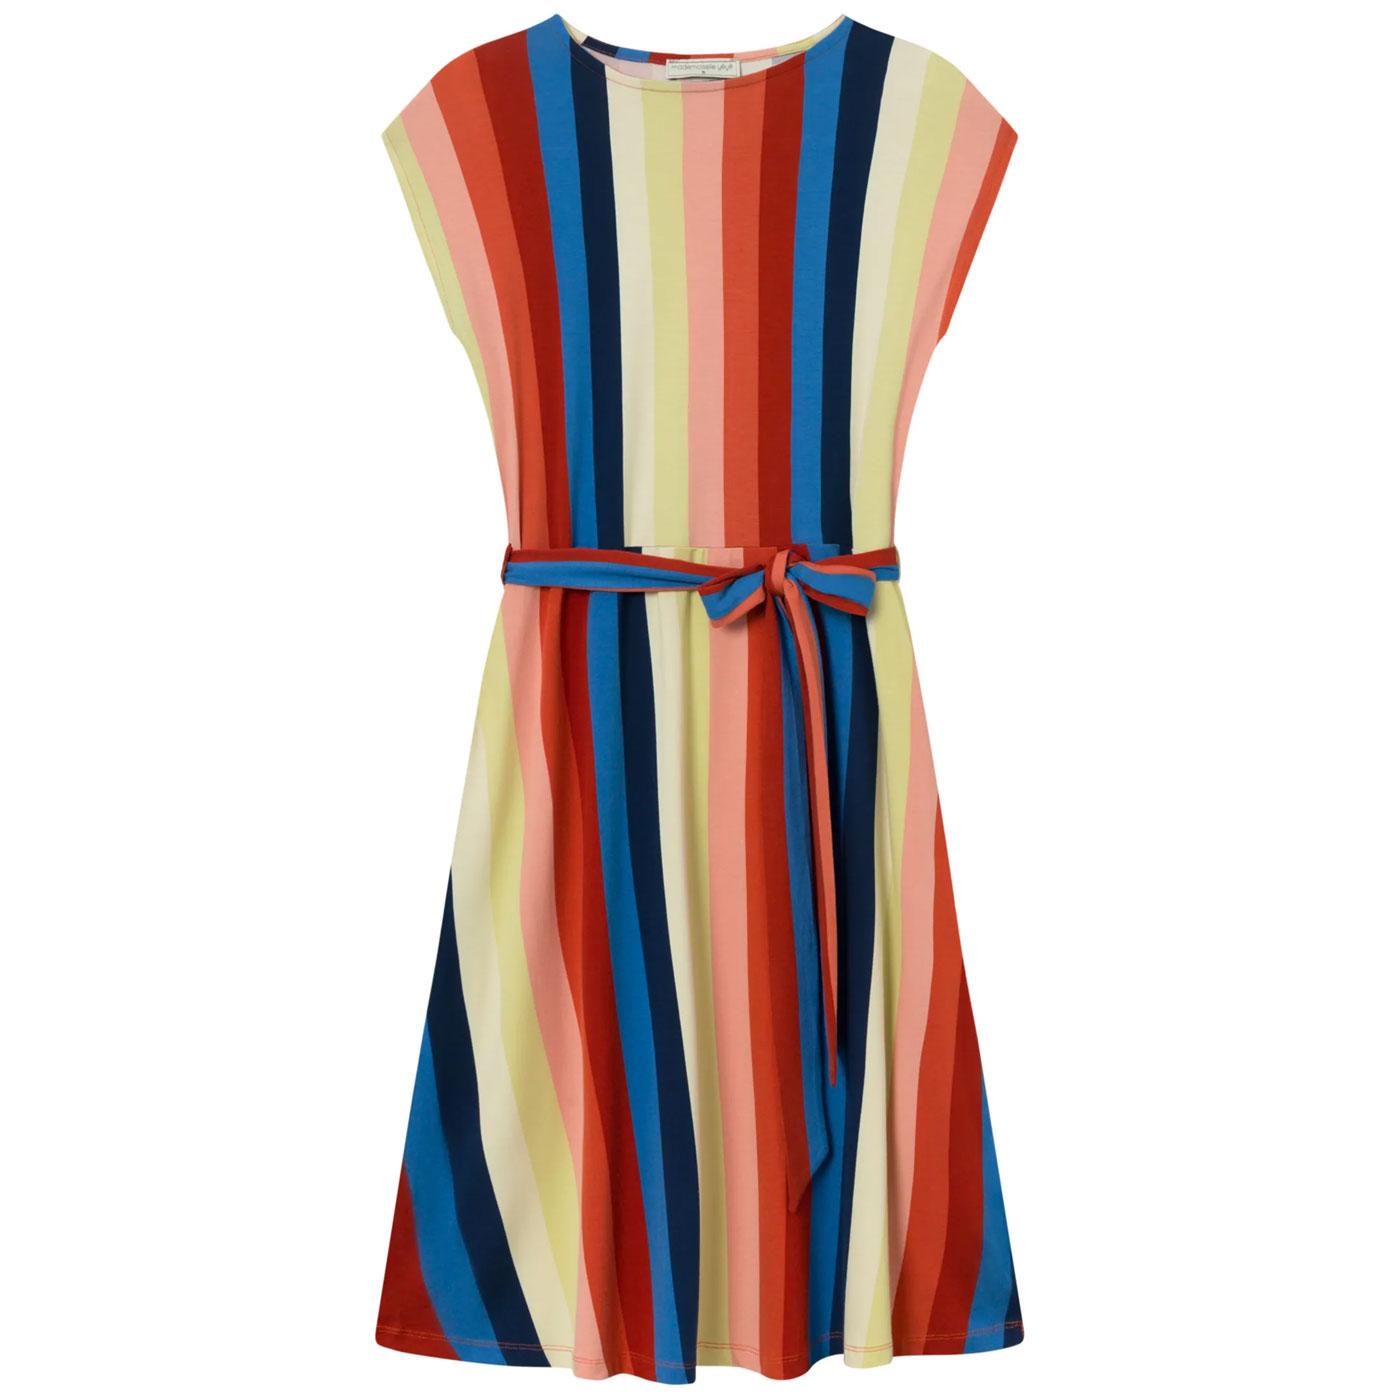 Mademoisellle Yeye Daily Chill Out Striped Dress